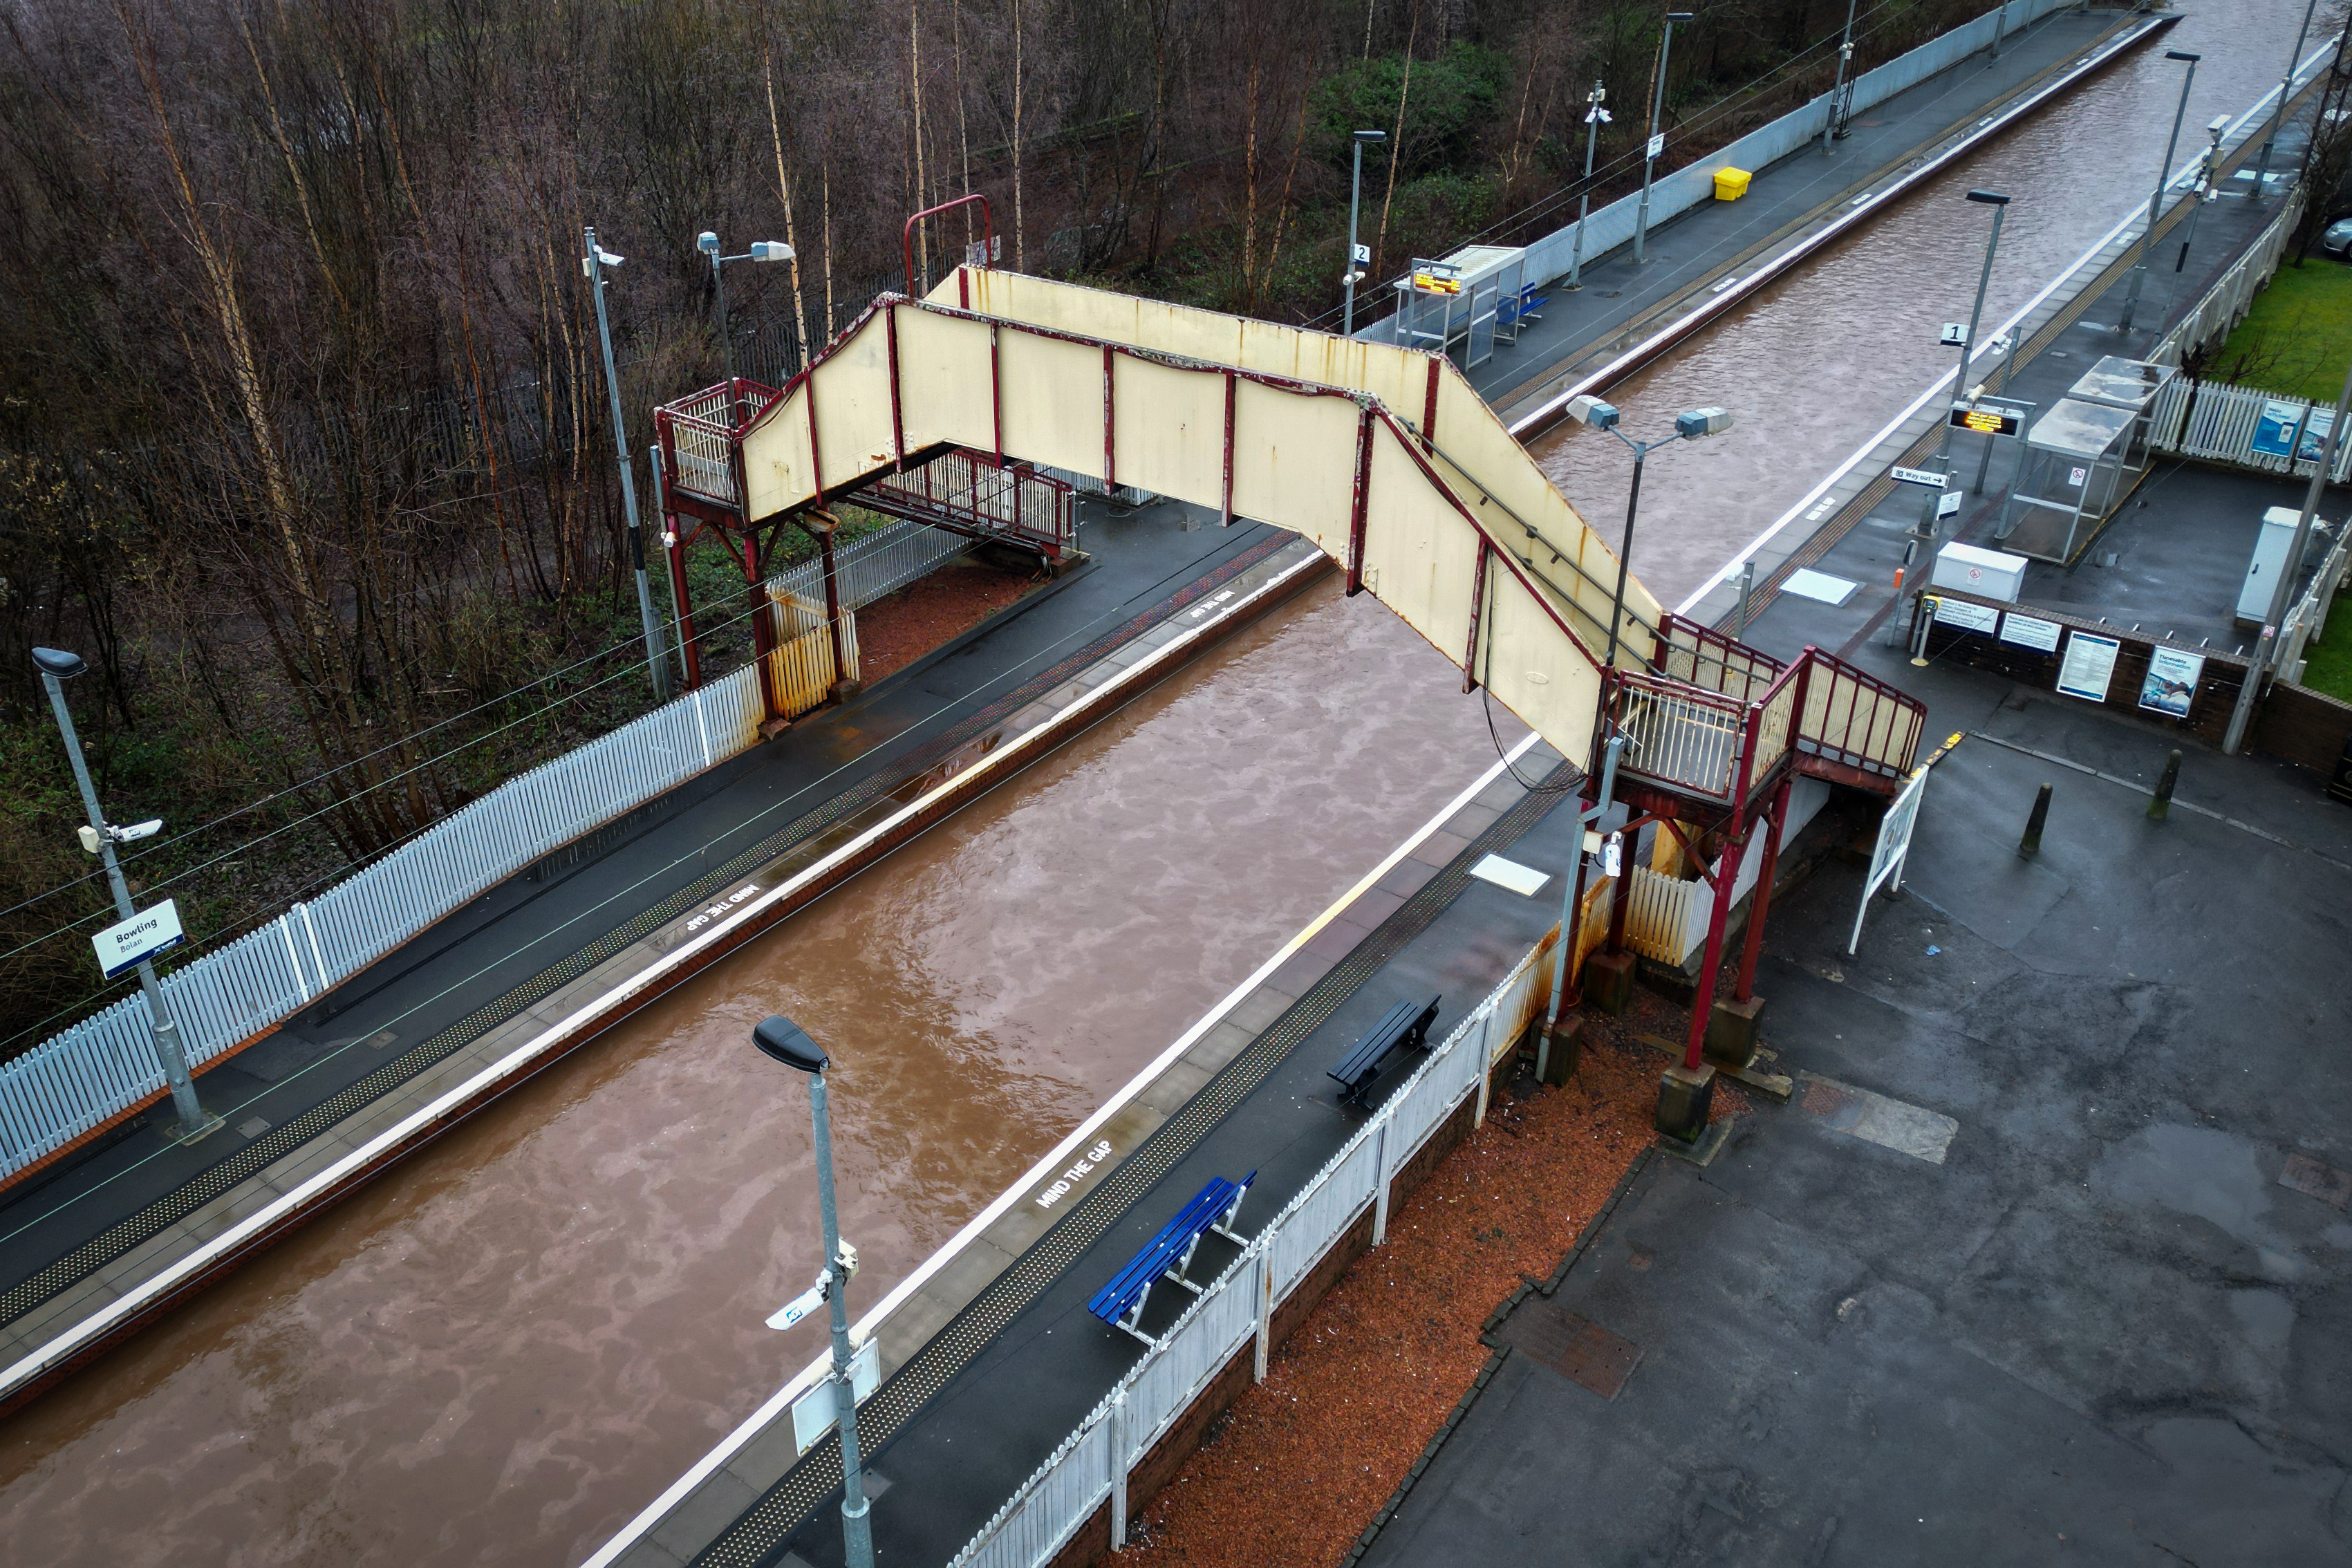 The flooded railway line at Bowling station on December 27, amid Storm Gerrit.